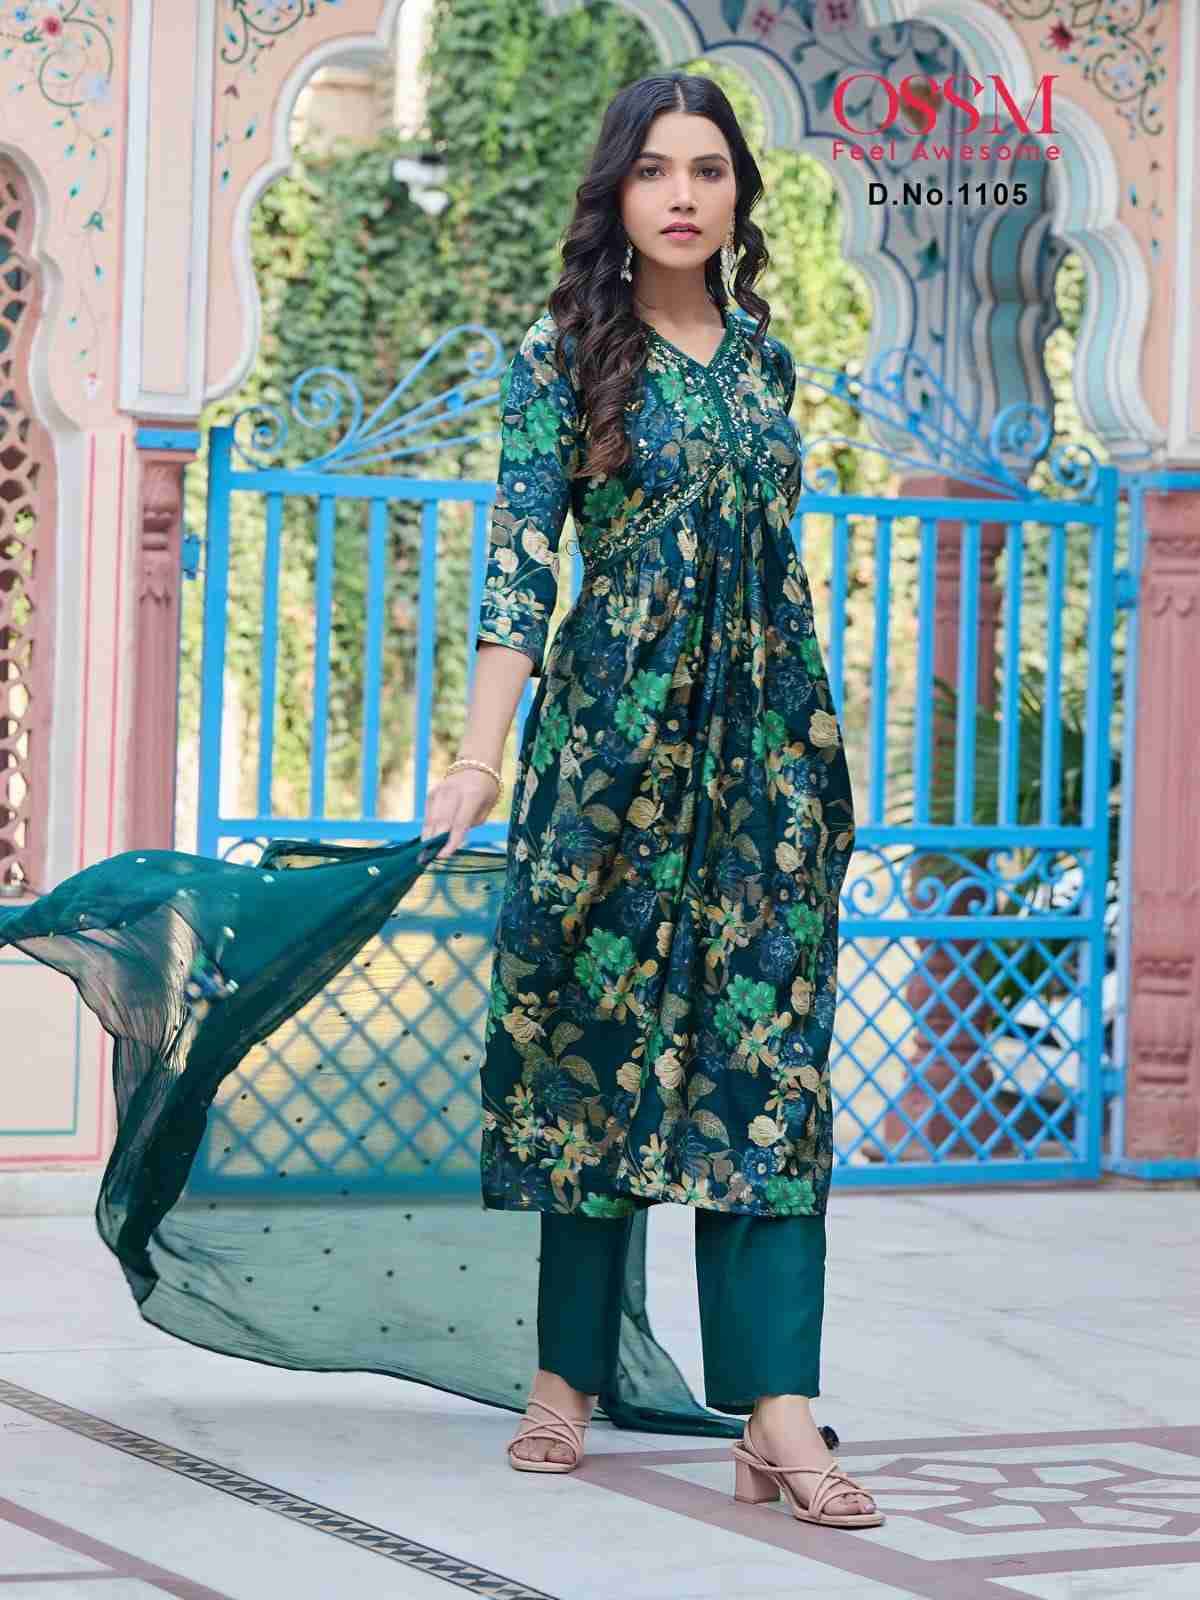 Resham Vol-11 By Ossm 1101 To 1106 Series Beautiful Suits Colorful Stylish Fancy Casual Wear & Ethnic Wear Modal Chanderi Print Dresses At Wholesale Price